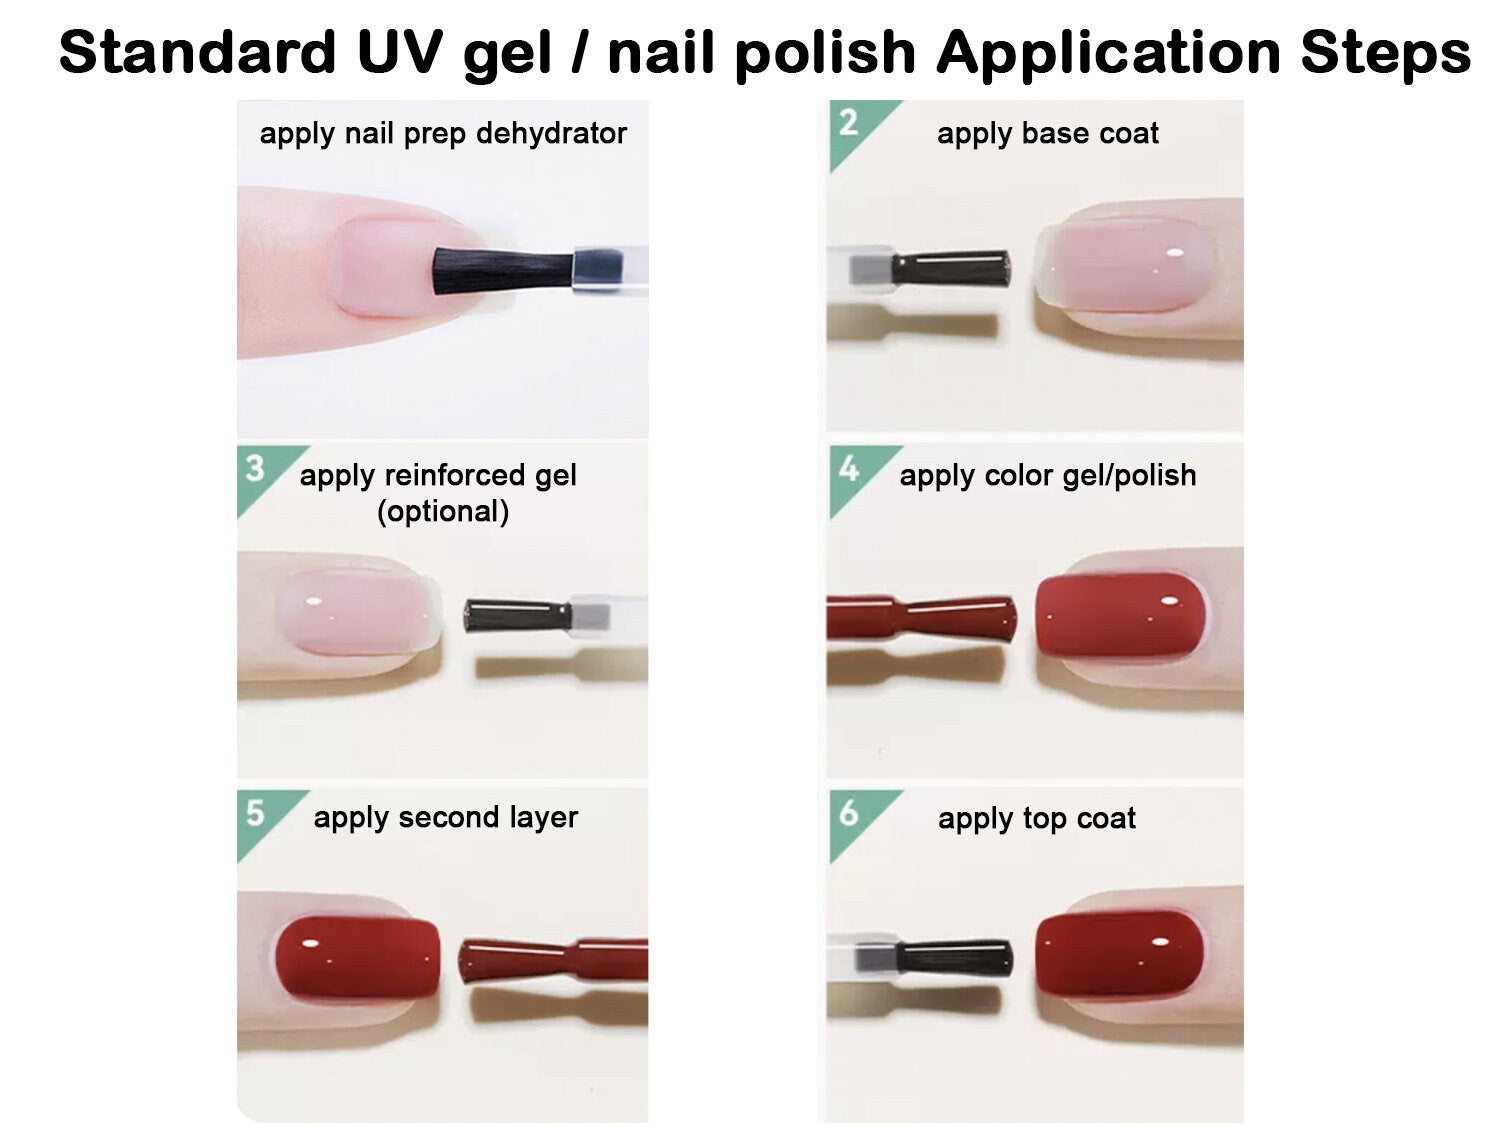 15ml Nail Prep Dehydrator/ Promote Better Adhesion of the Artificial Tips & Gel polish/ Nail Balancing solution Dehydration Liquid Supply